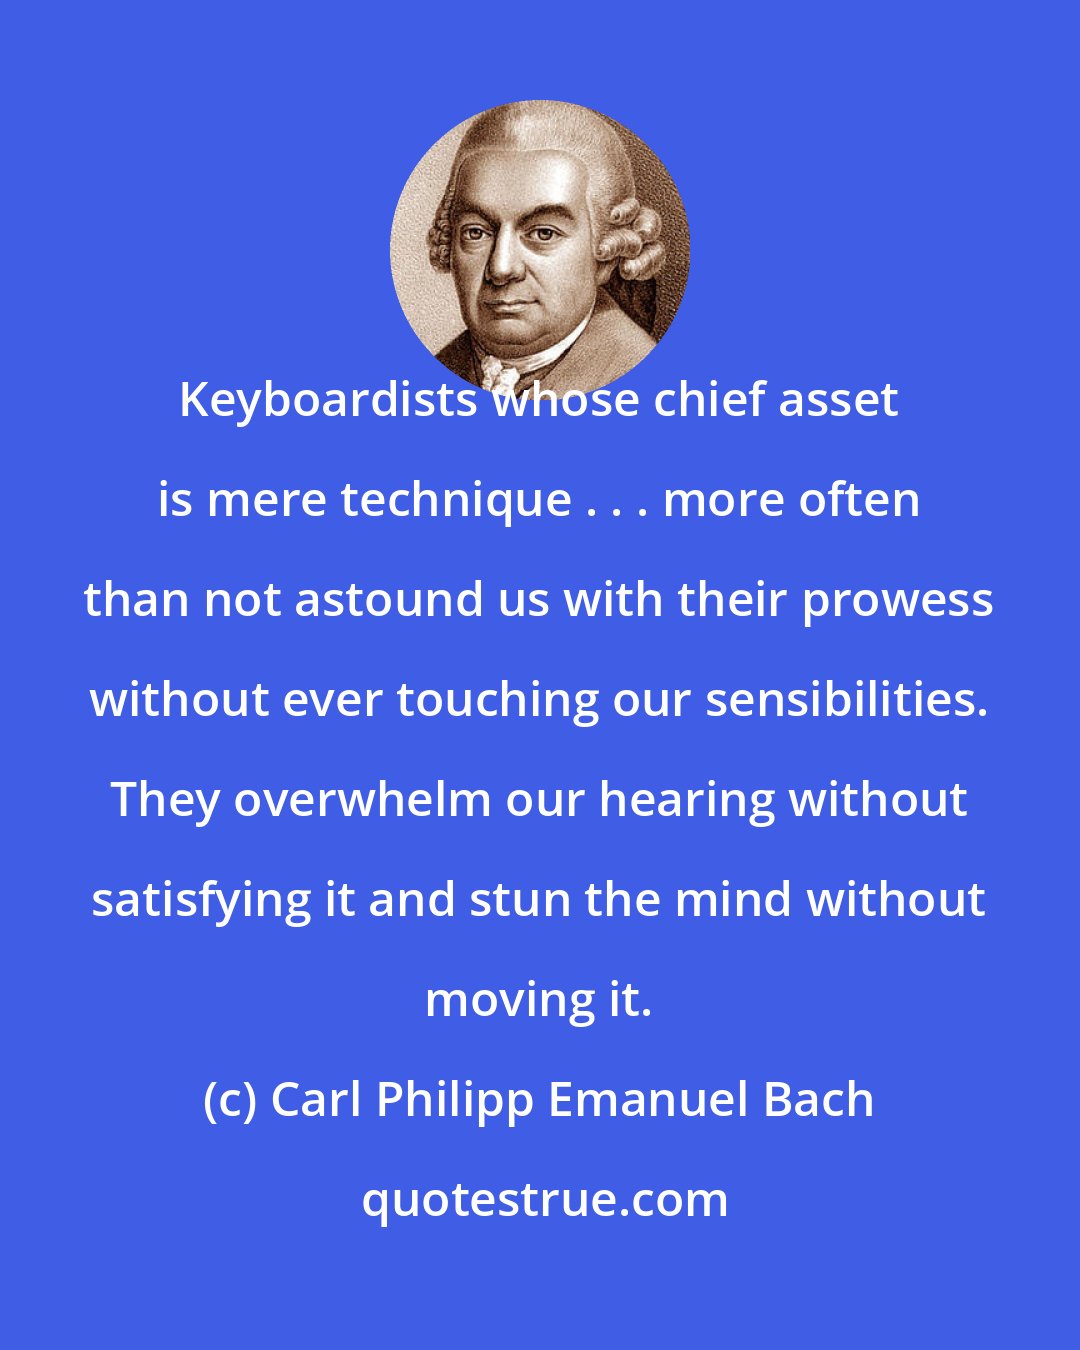 Carl Philipp Emanuel Bach: Keyboardists whose chief asset is mere technique . . . more often than not astound us with their prowess without ever touching our sensibilities. They overwhelm our hearing without satisfying it and stun the mind without moving it.